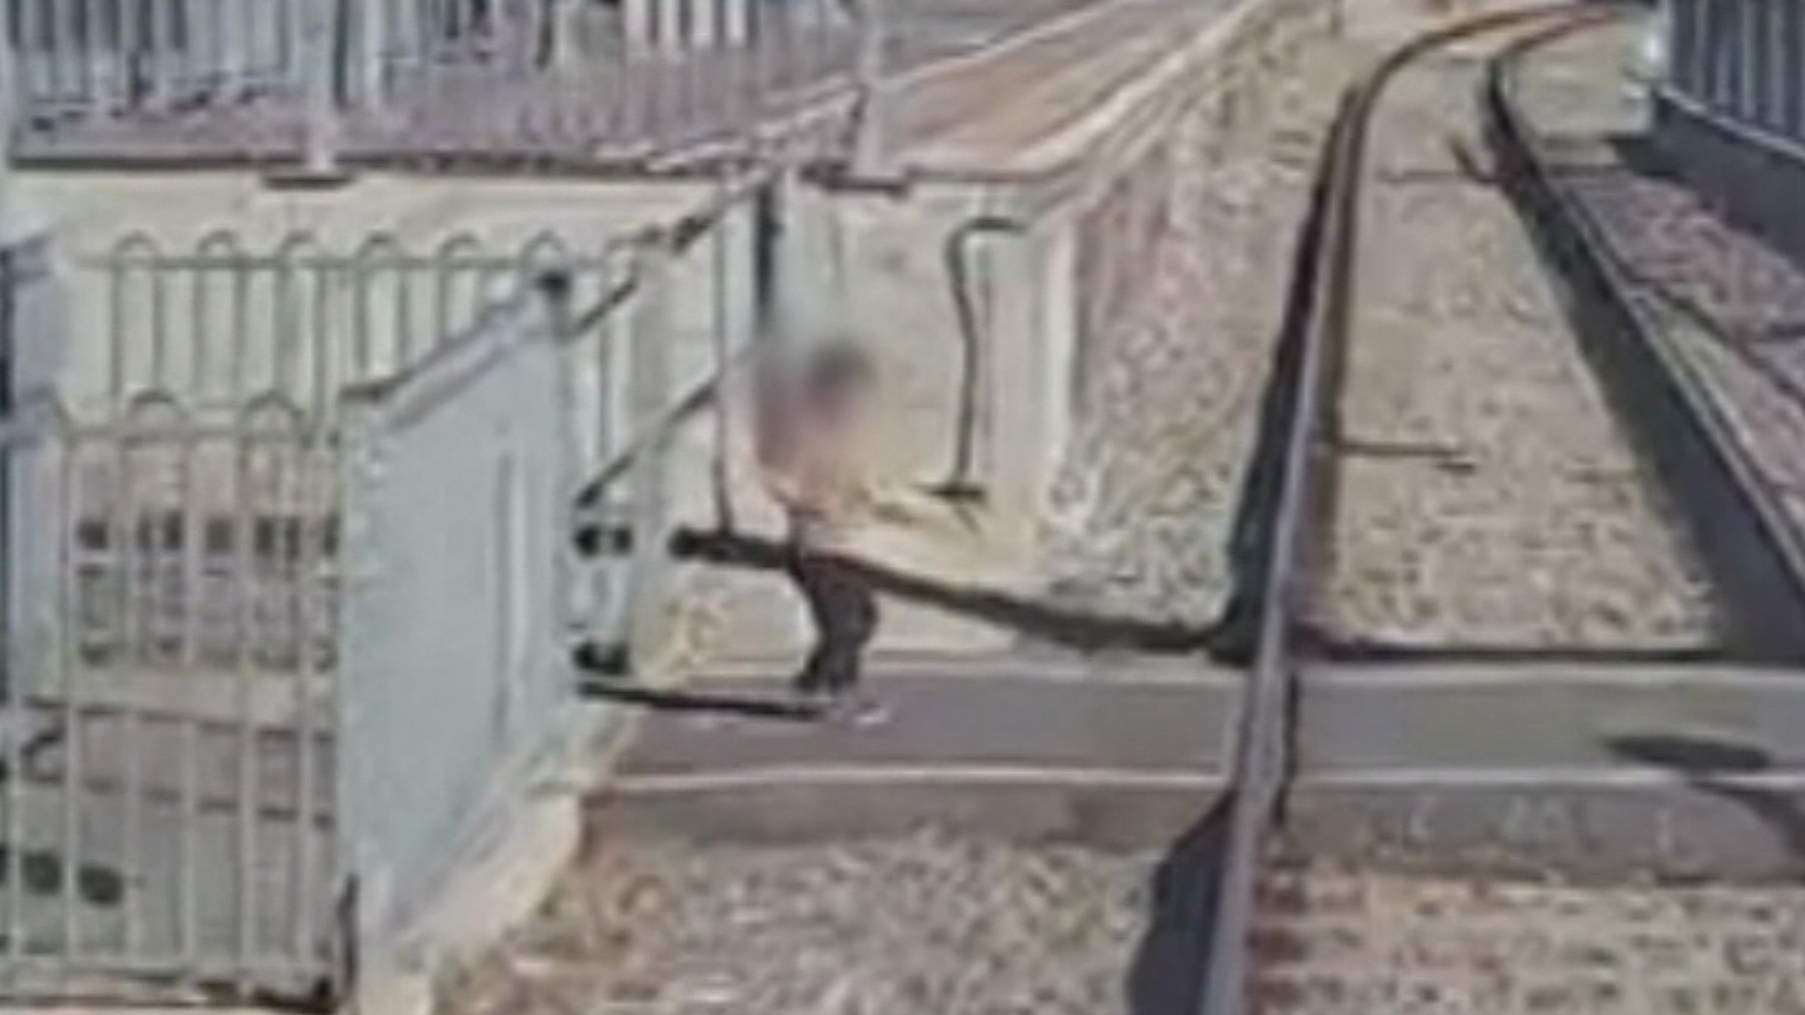 Child nearly hit by train in SA